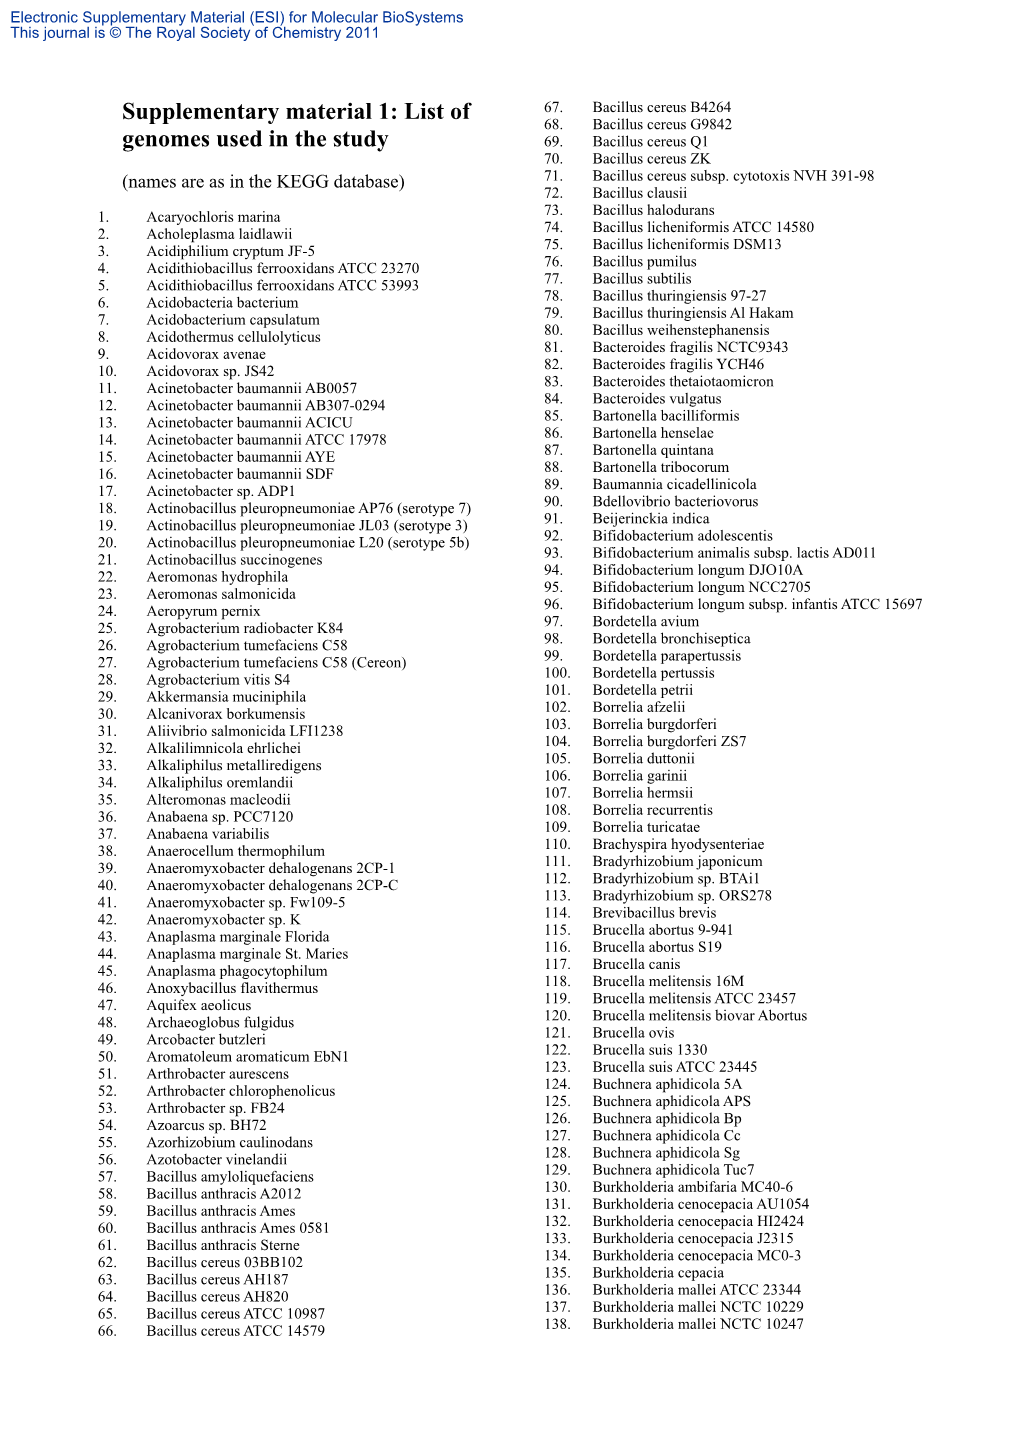 List of Genomes Used in the Study